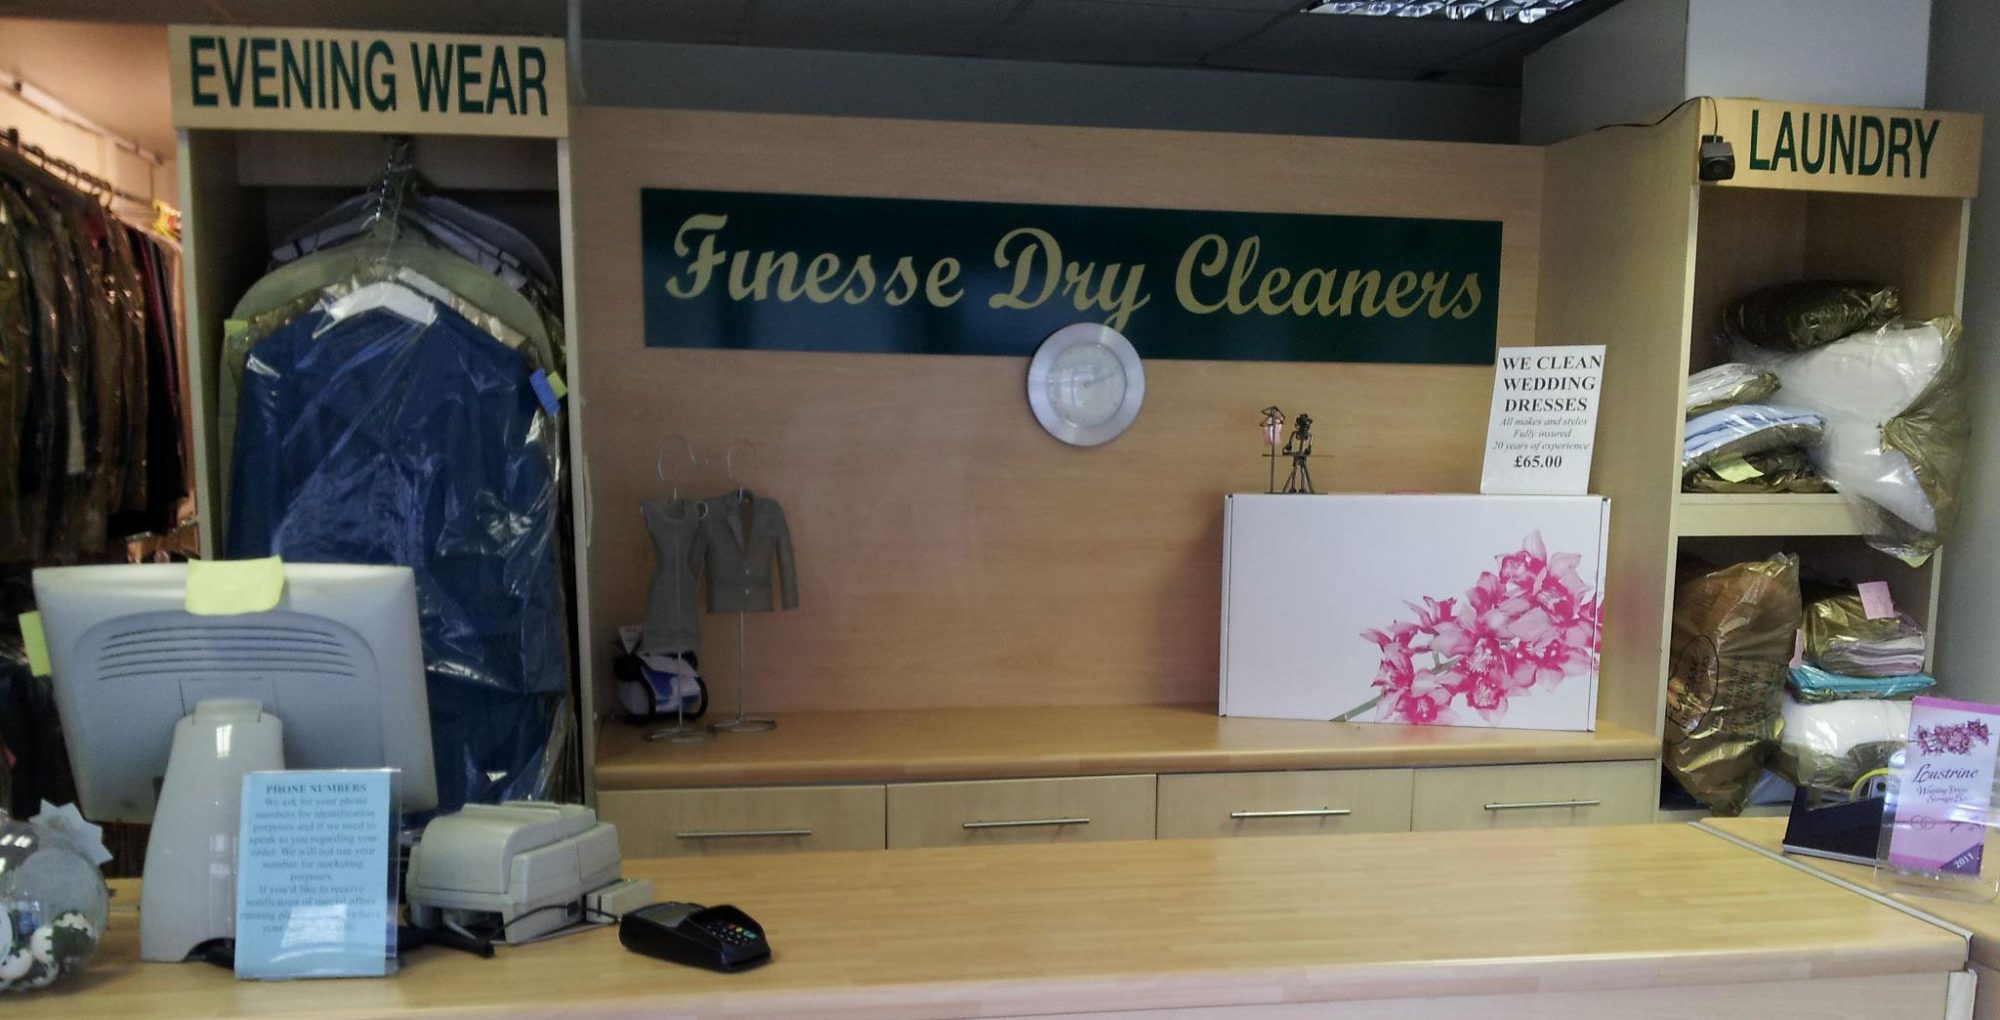 Finesse dry cleaners